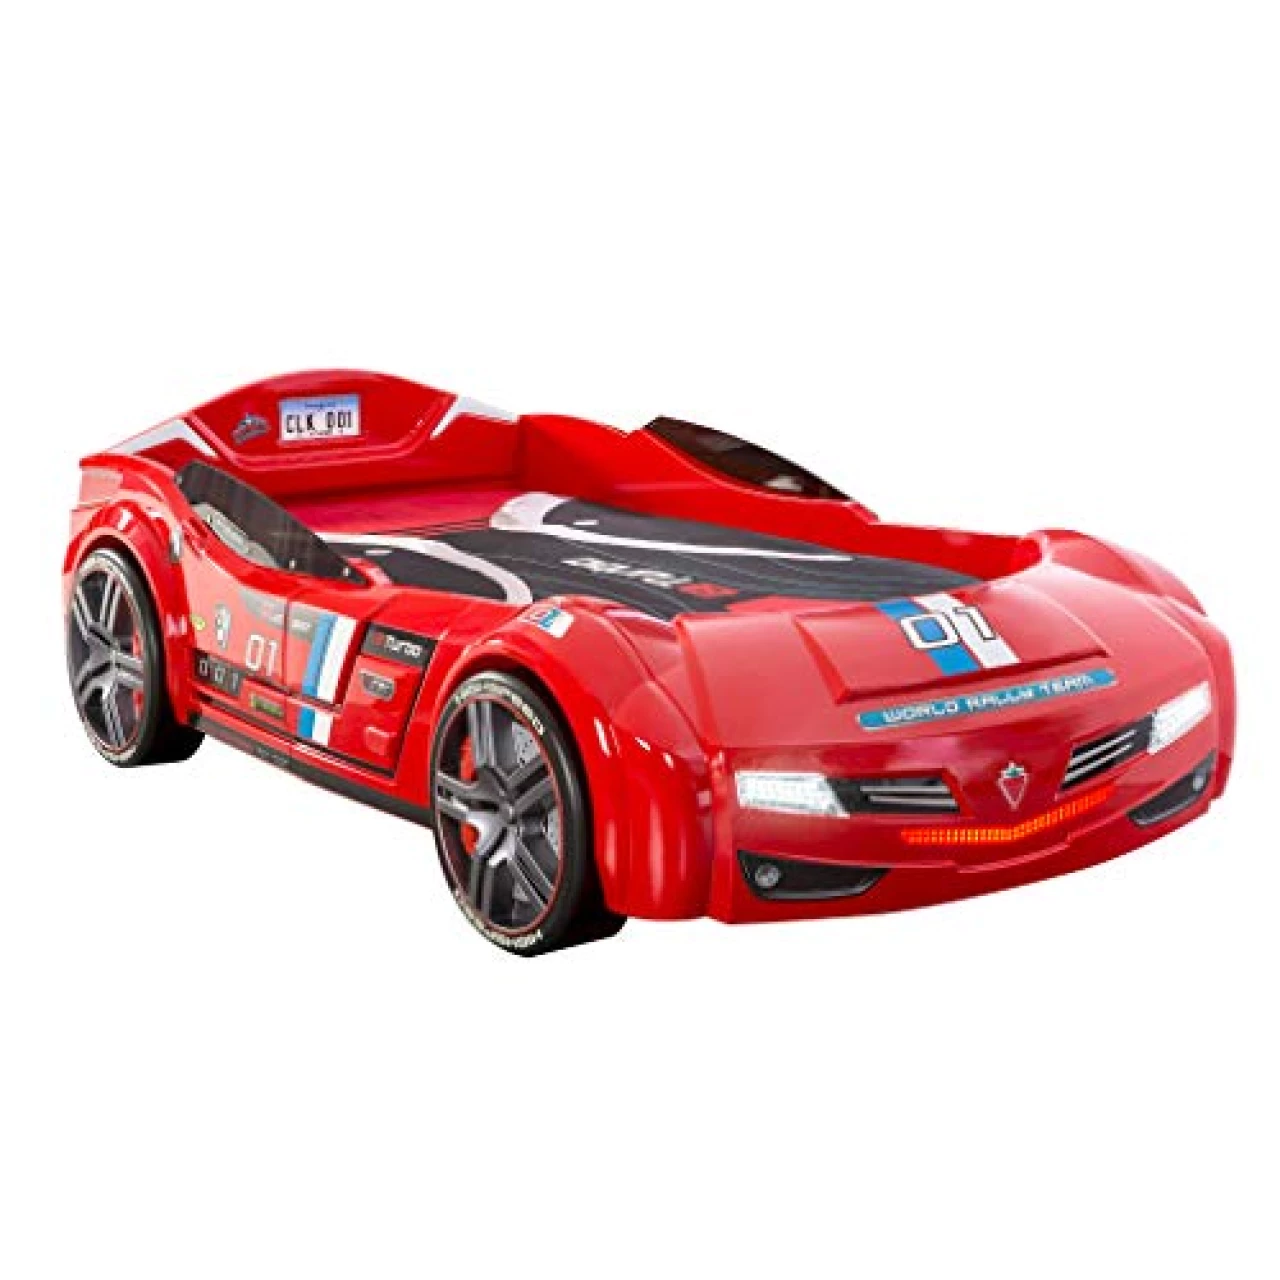 Cilek BiTurbo Twin Kids Race Car Bed Frame For Boys at age 2 to 12, Remote Controlled, LED Headlights, Engine Sound, License Plate, Red